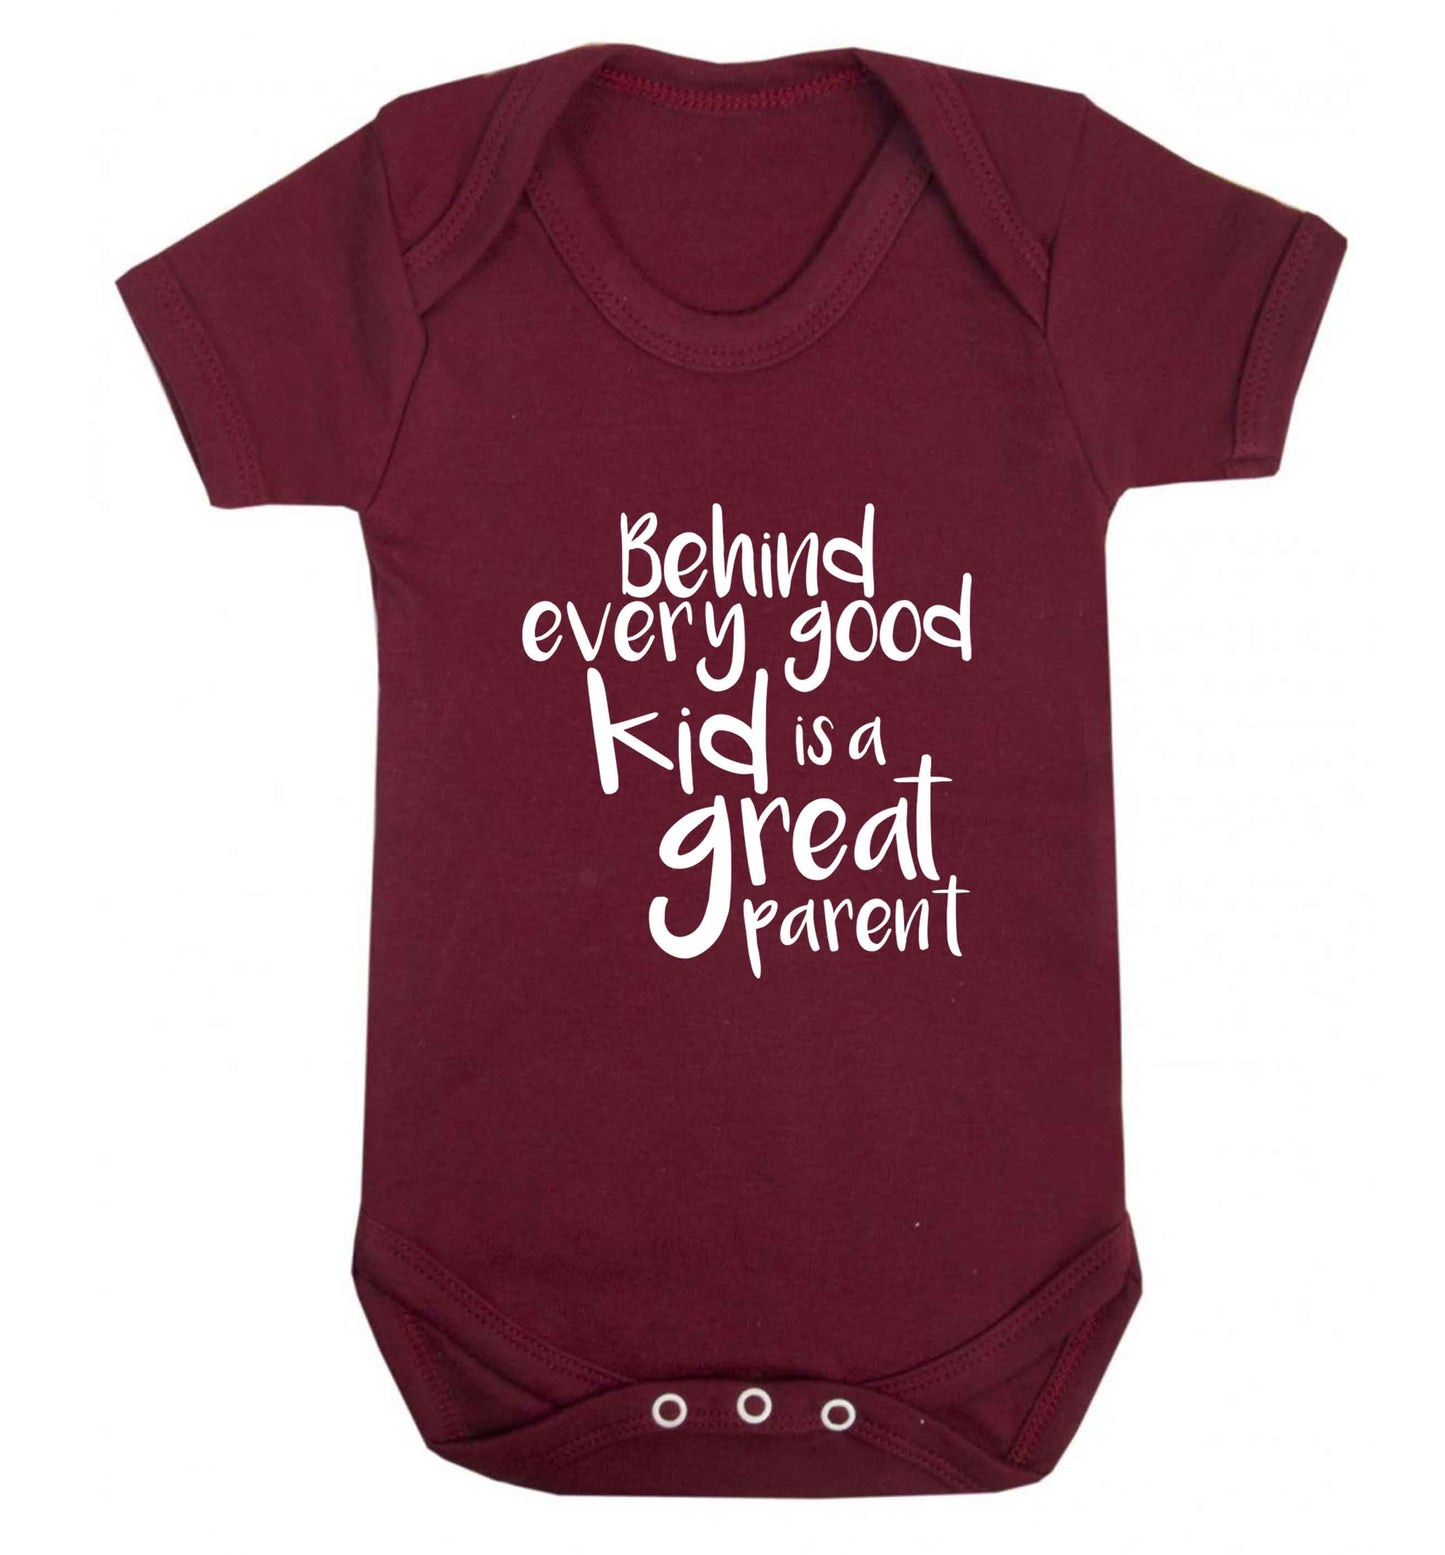 Behind every good kid is a great parent baby vest maroon 18-24 months